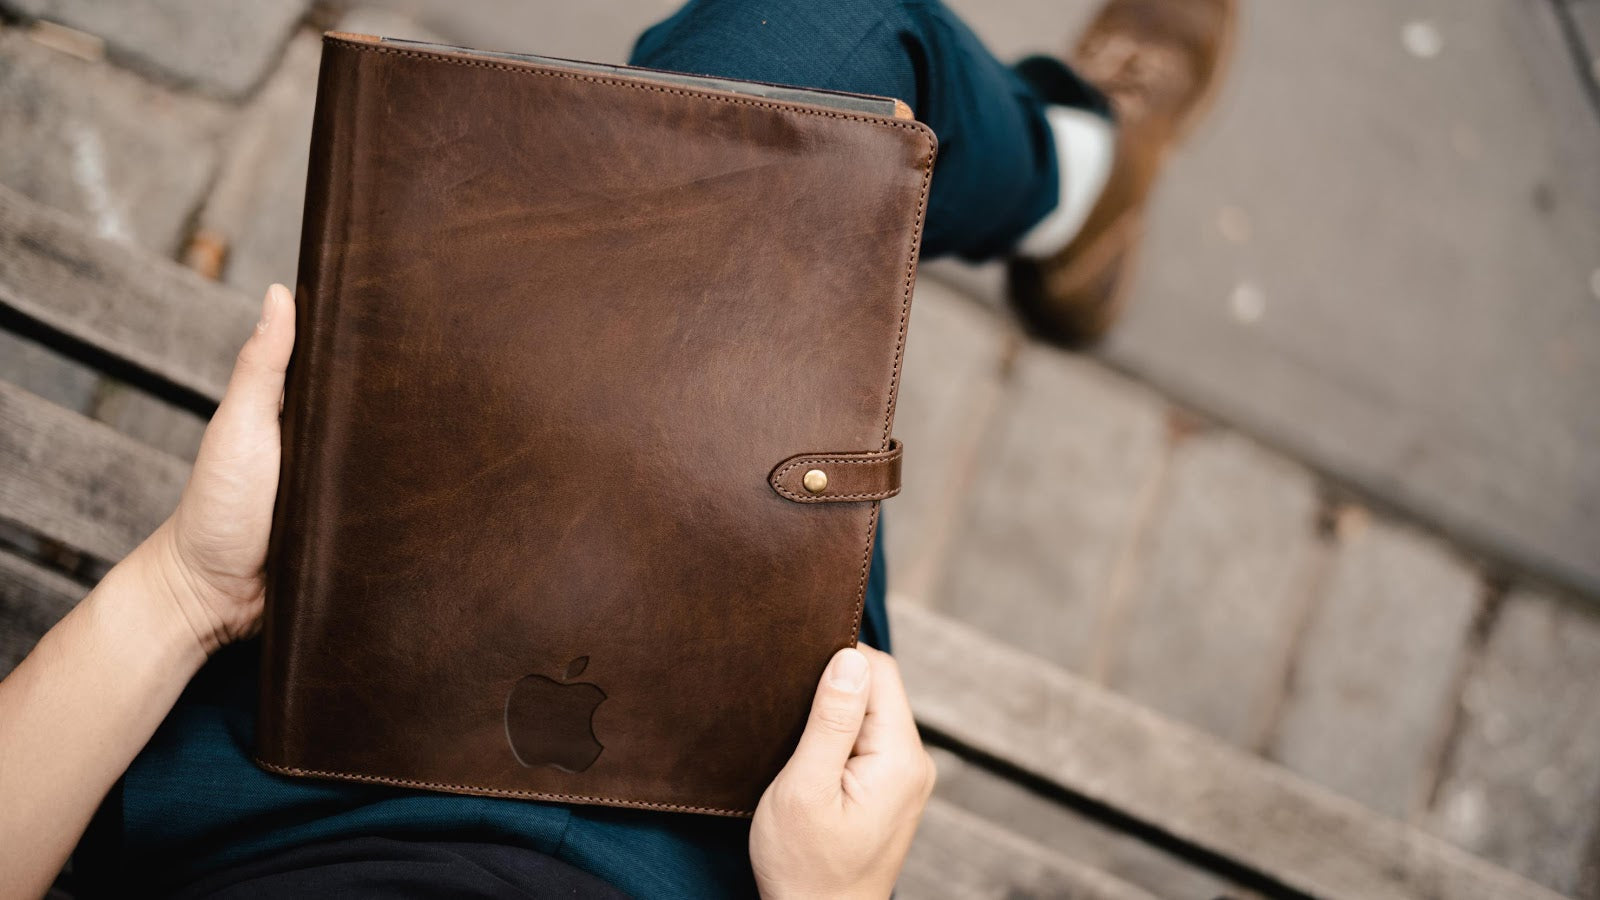 FOTO - Personalized Leather Corporate Gifts that give back - FOTO